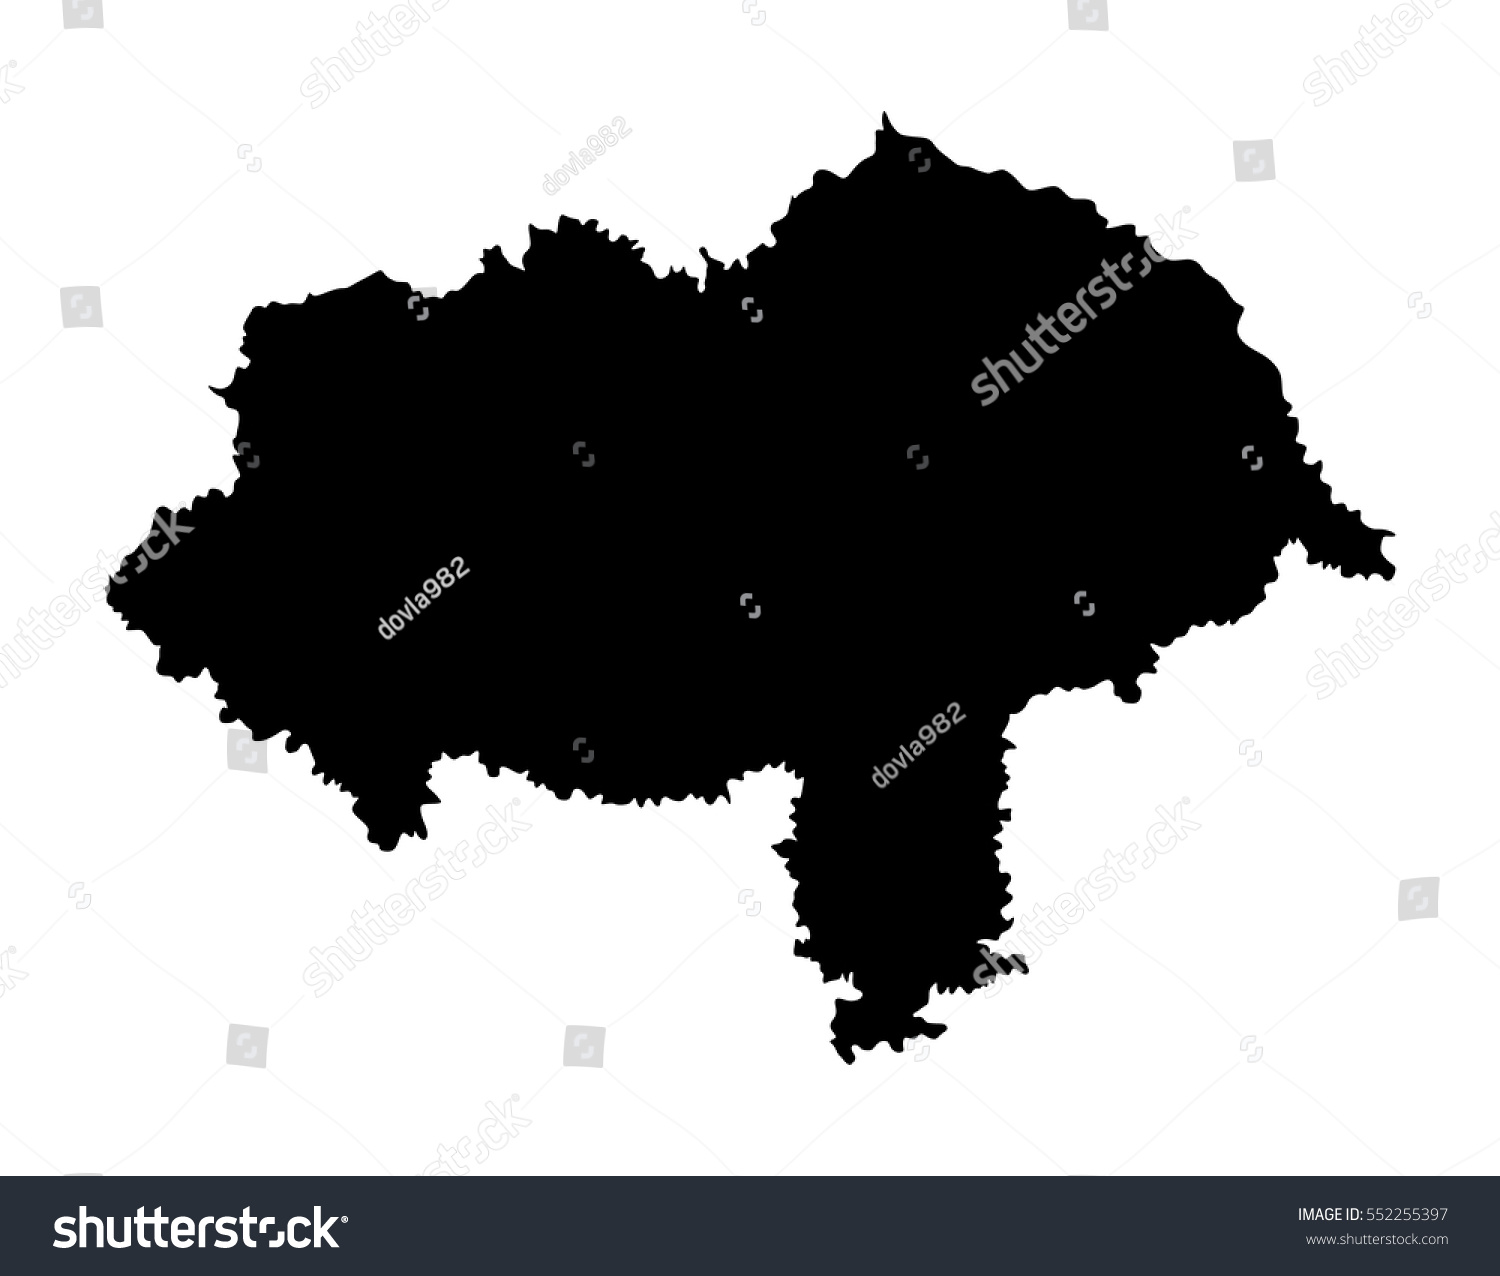 SVG of North Yorkshire vector silhouette map, county (or shire county) and larger ceremonial county in England. svg